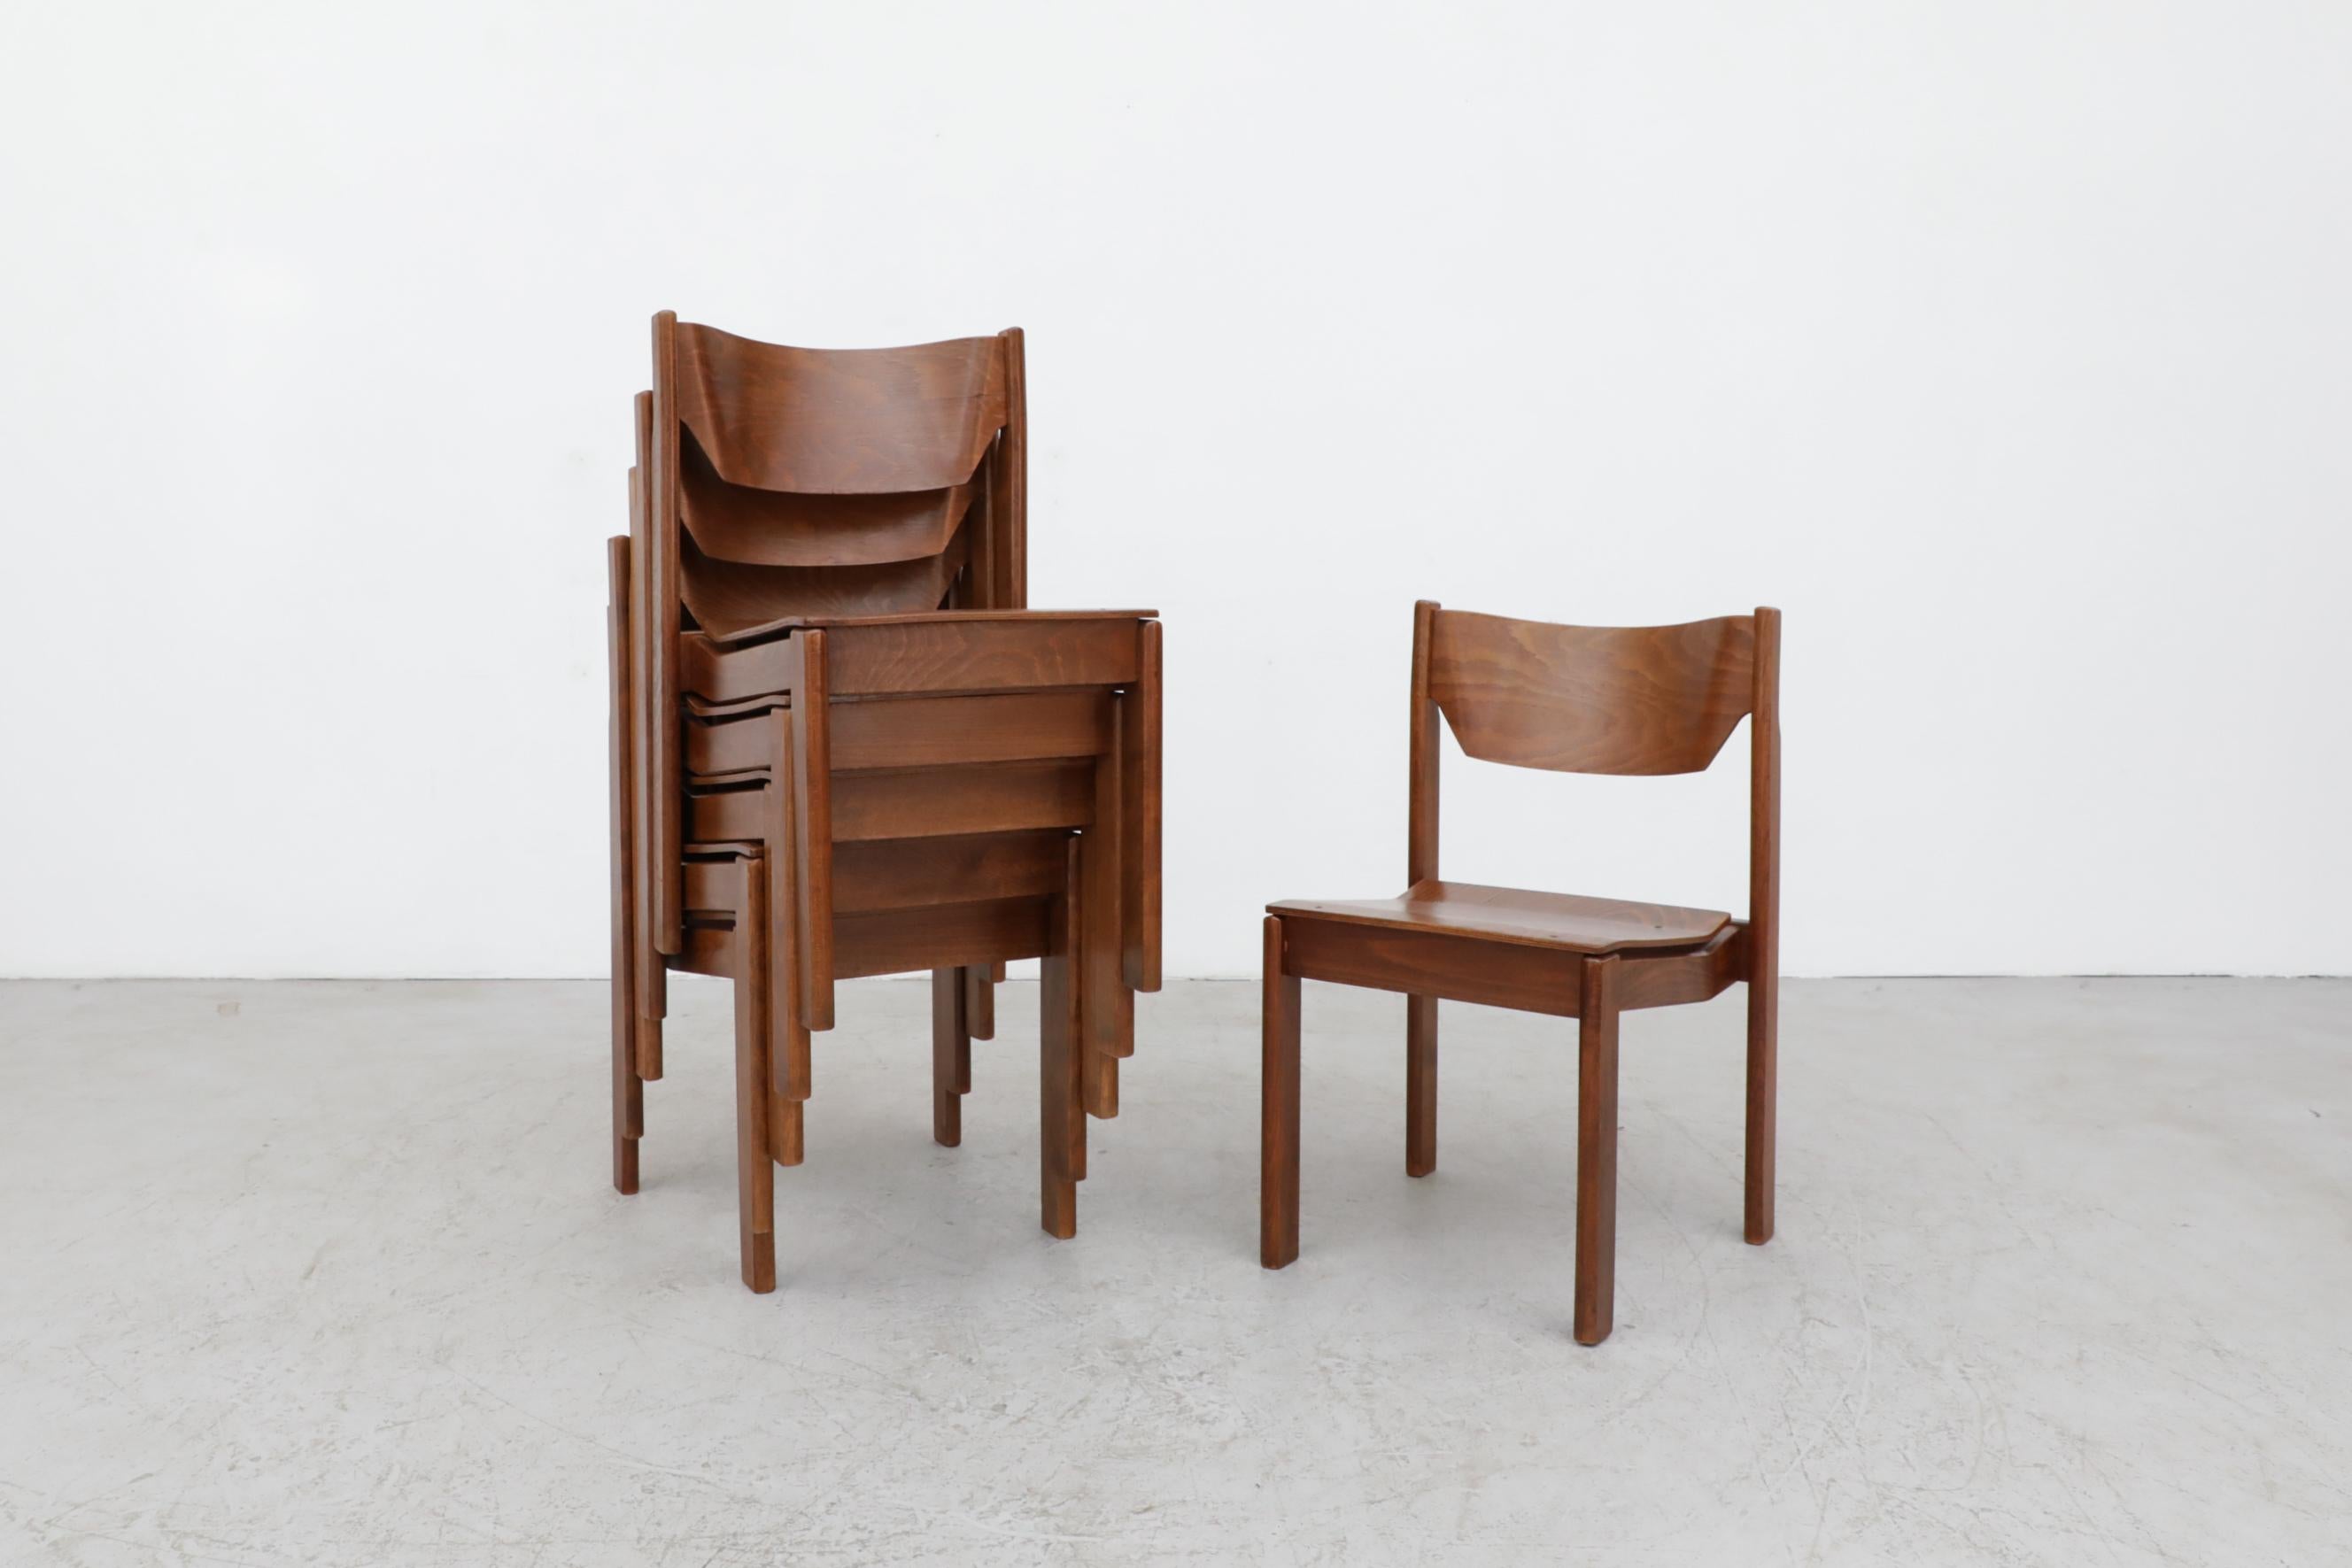 Lightly refinished Sven Markelius style dark stained birch stacking chairs. In lightly refinished but overall great condition with some visible wear and scratching.